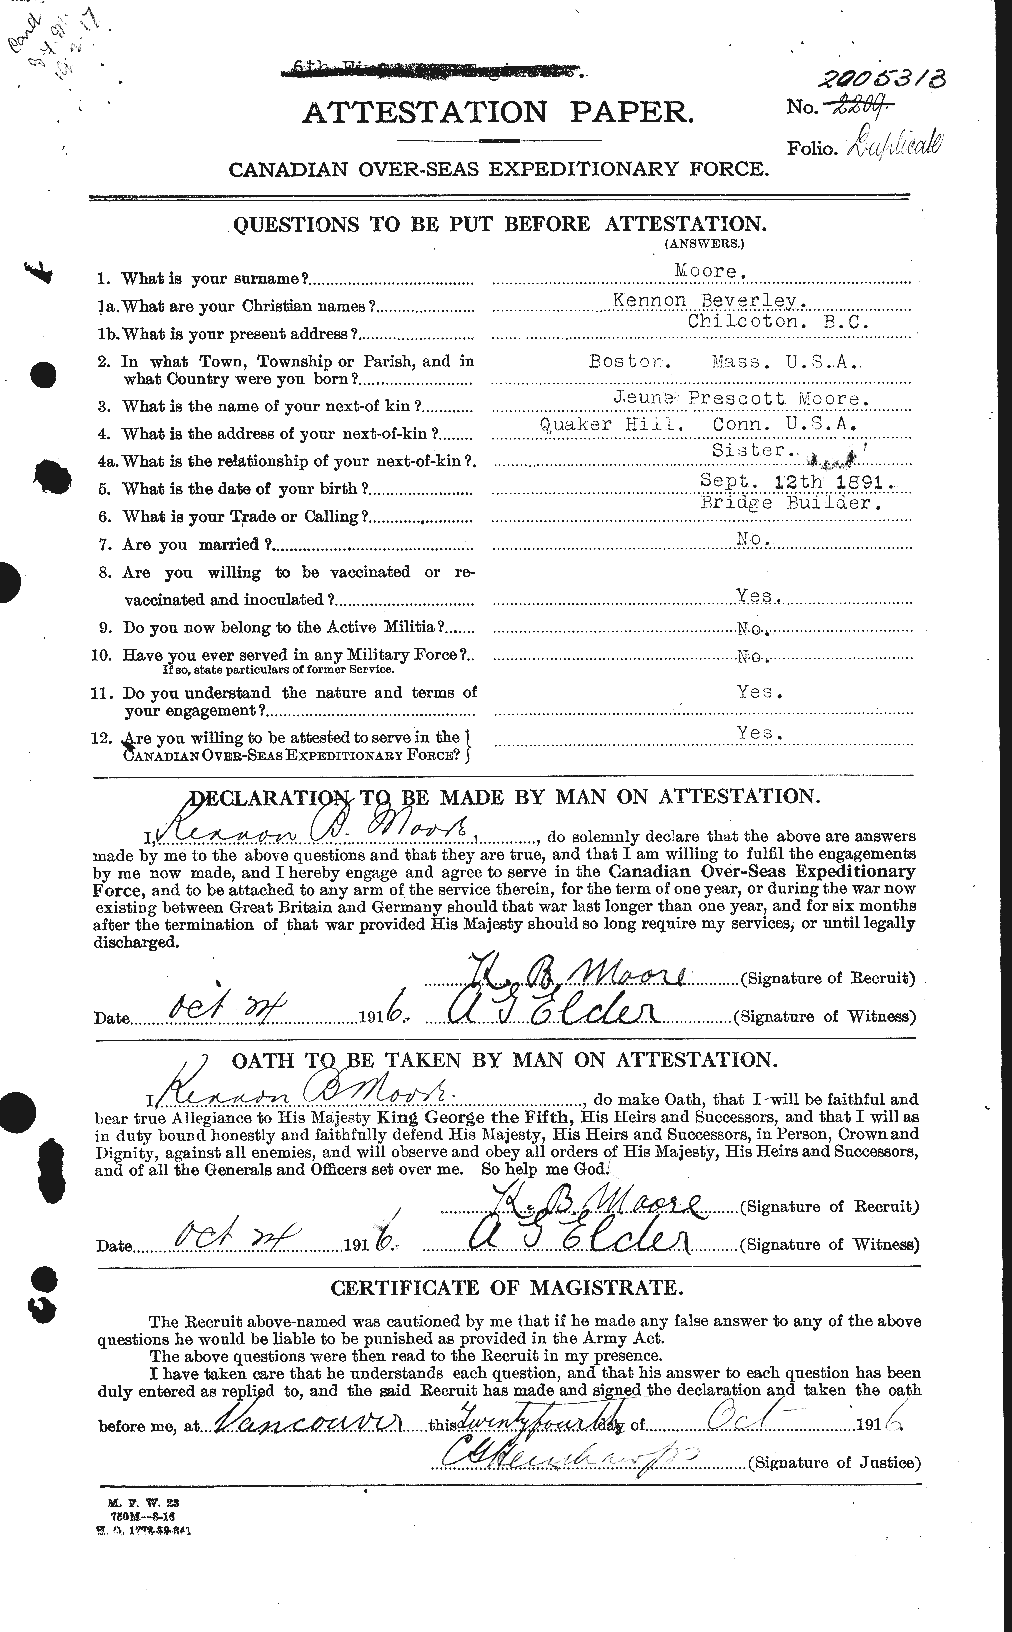 Personnel Records of the First World War - CEF 503388a